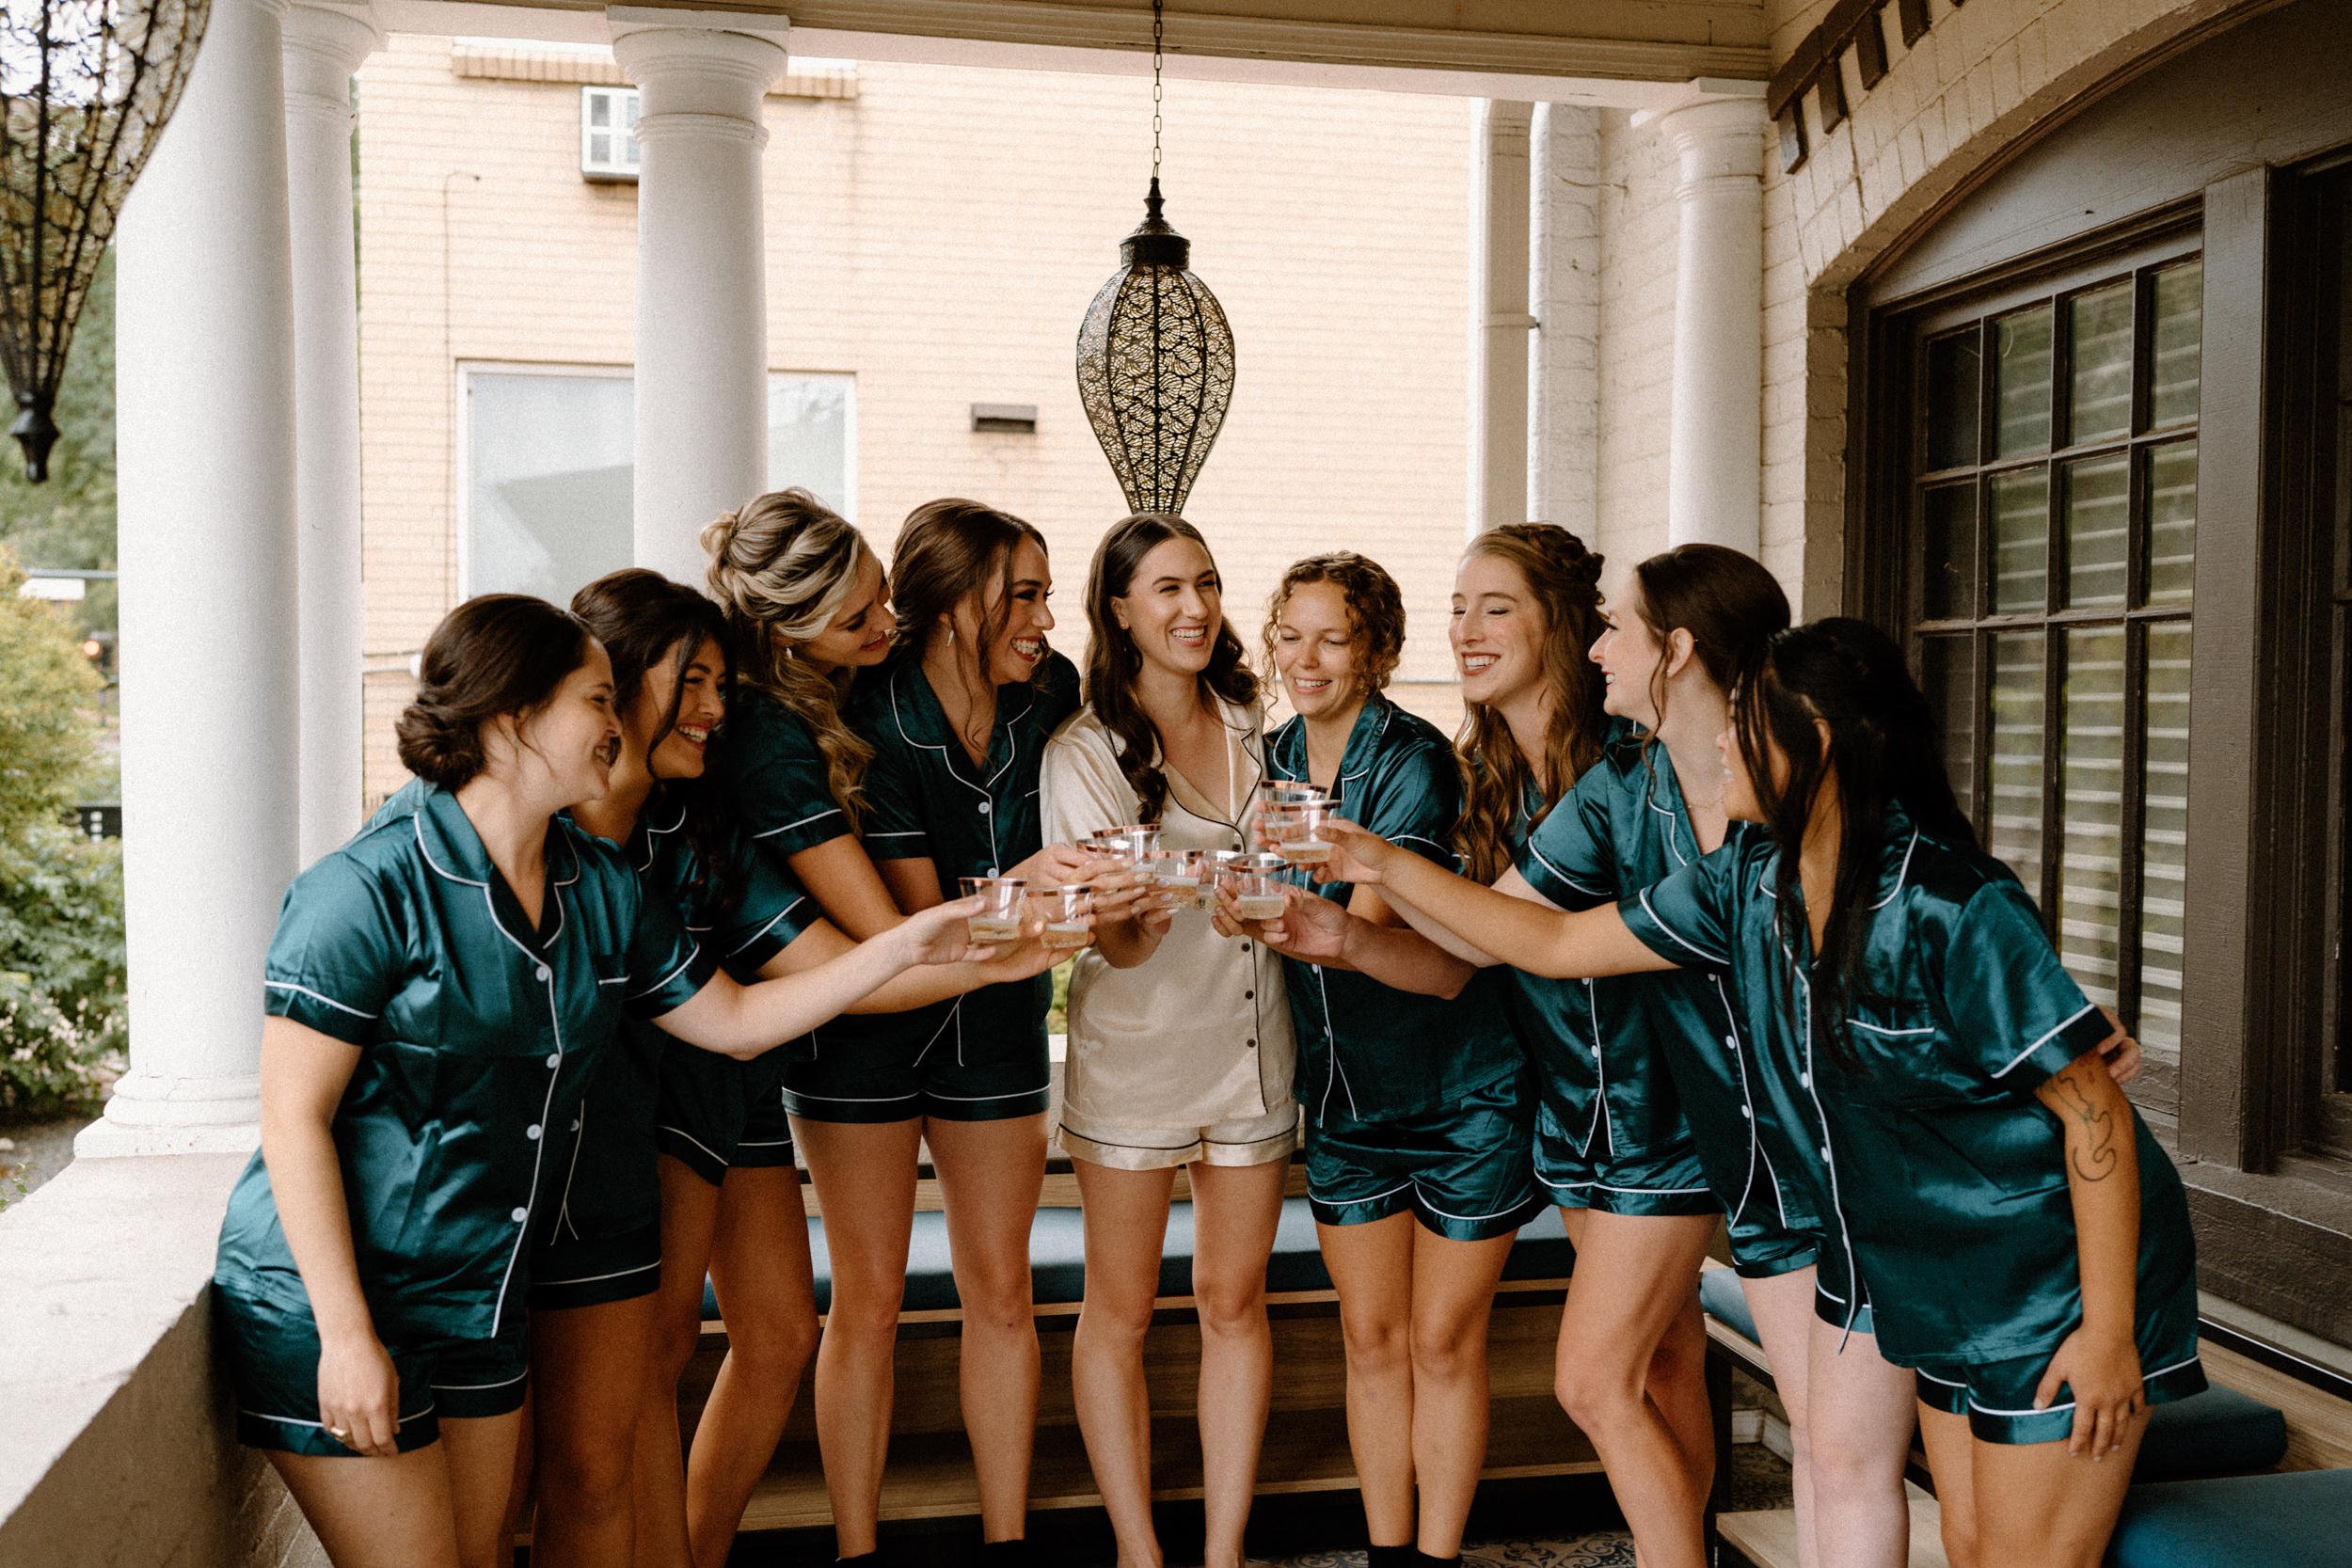 The bridal party raises their glasses of champagne in a toast